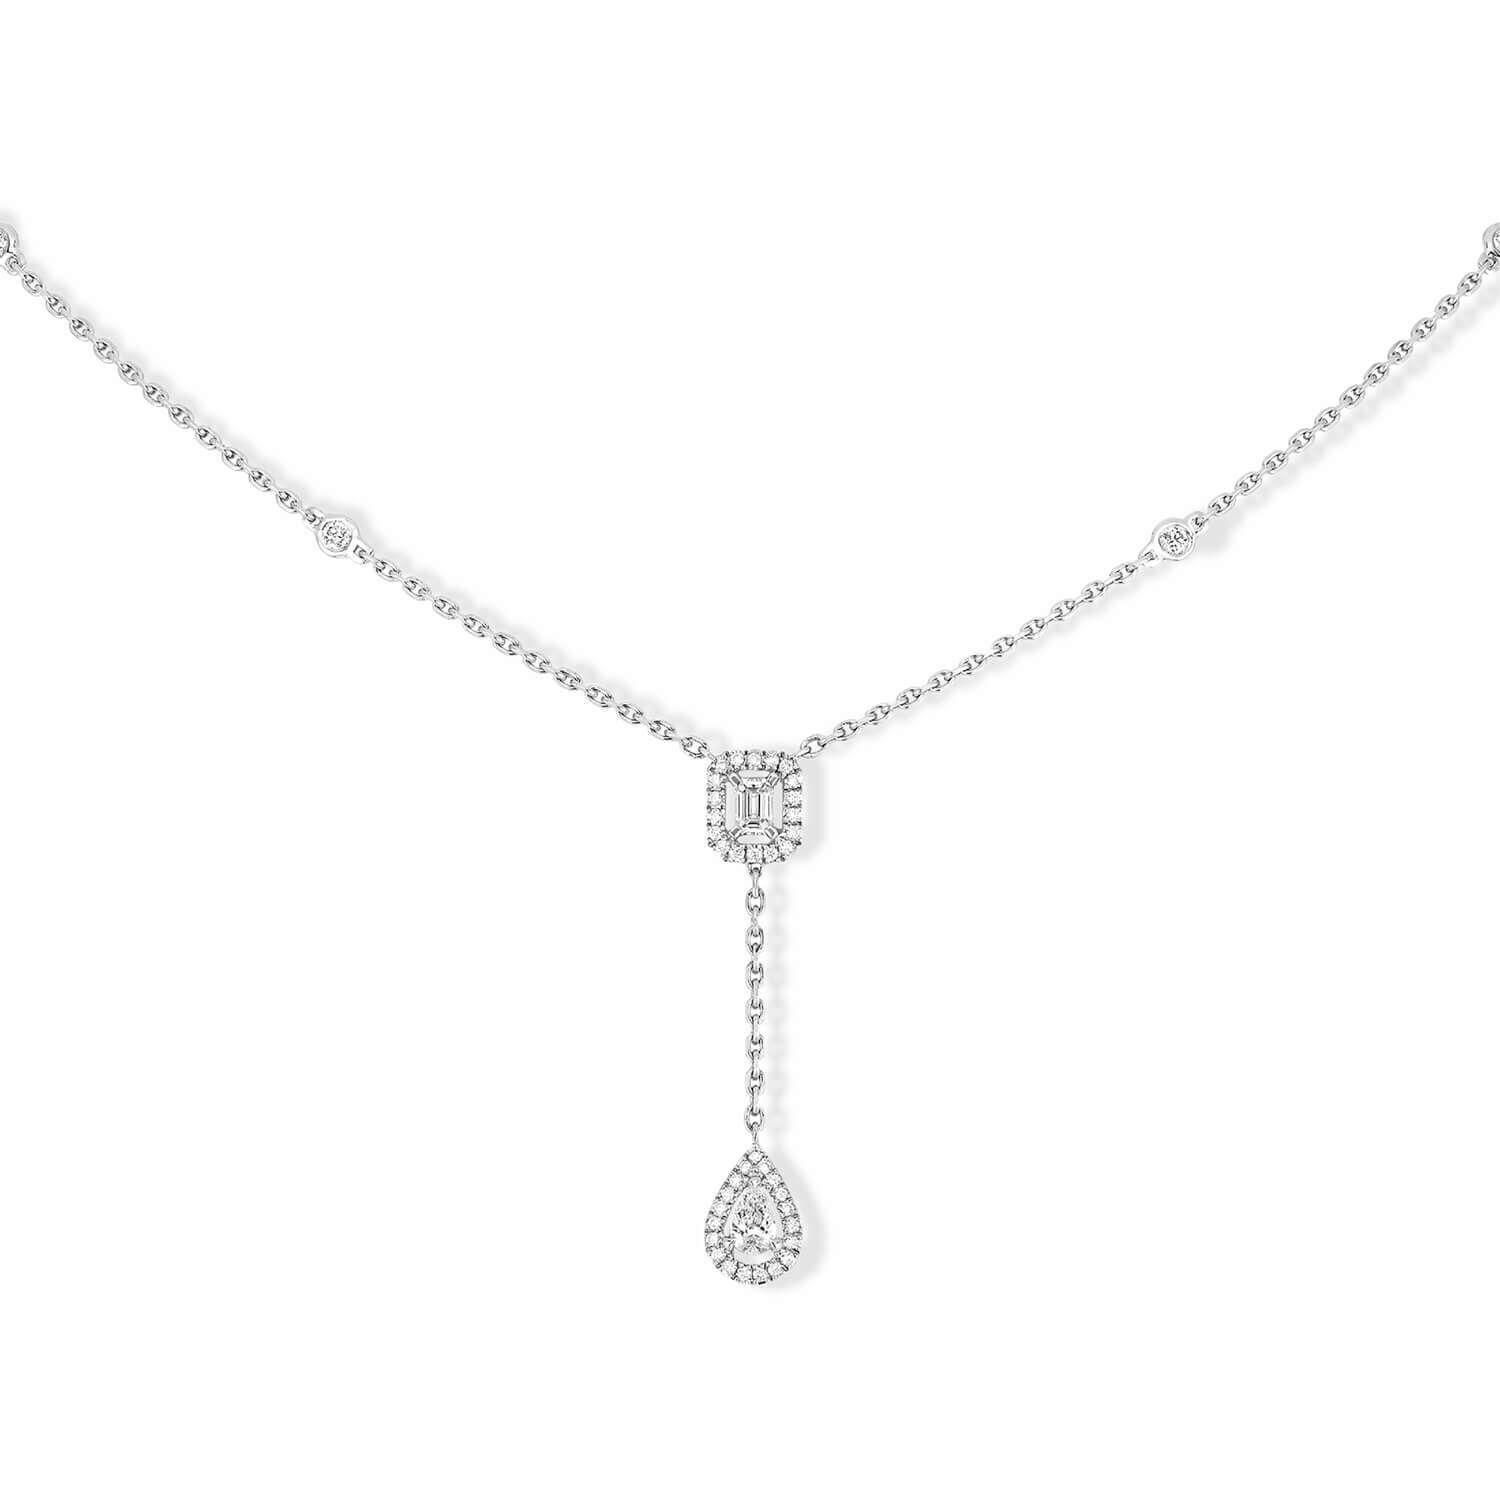 Sold at Auction: 18ct Yellow and White Gold Diamond Necklace